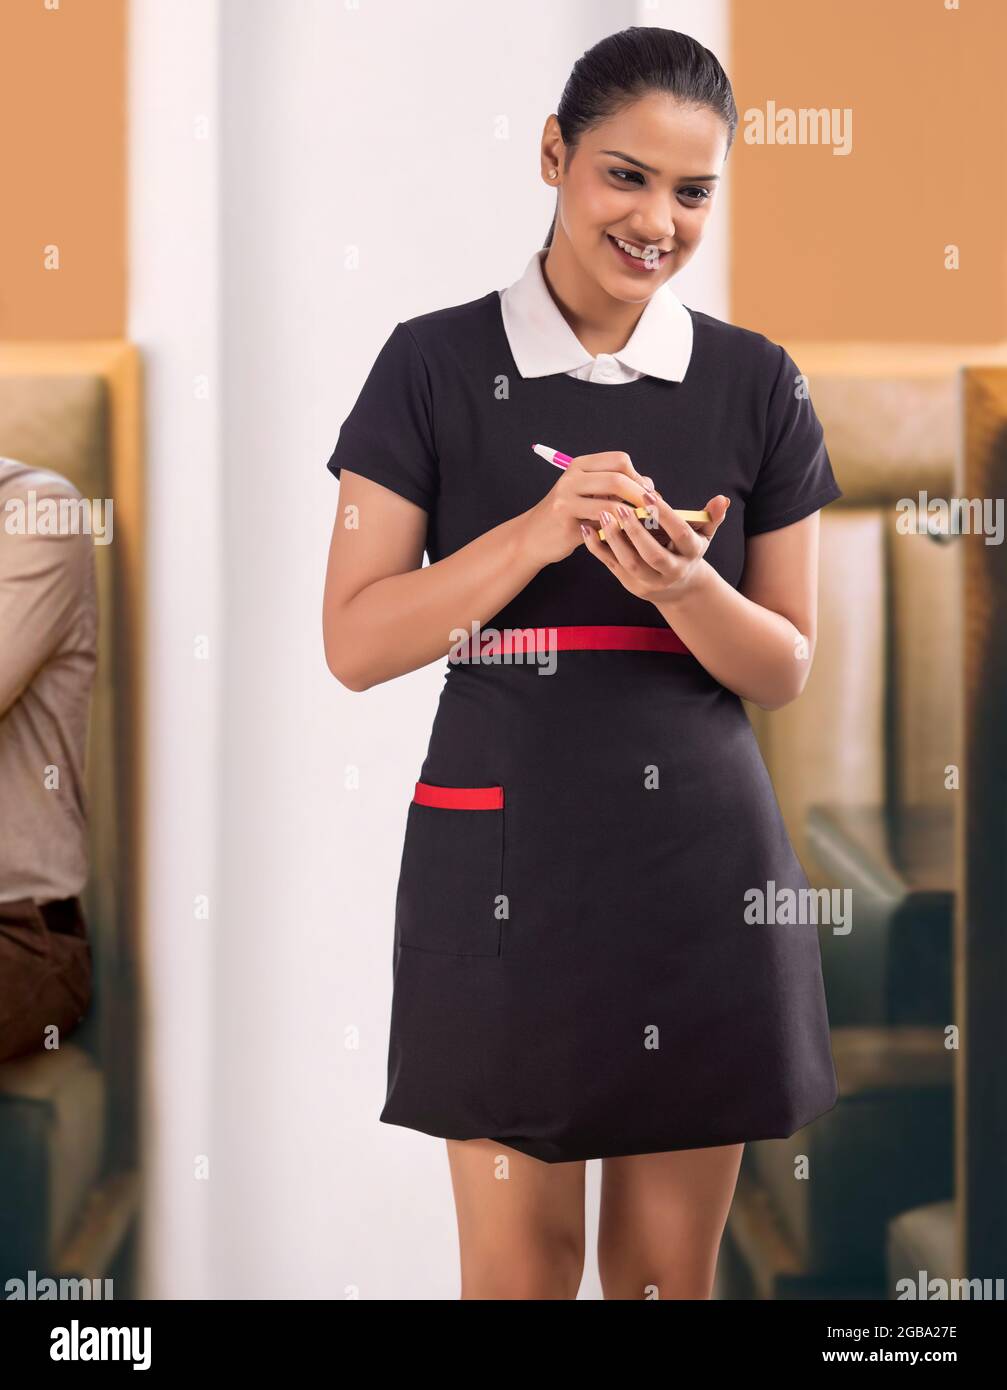 A HAPPY WAITRESS TAKING DOWN ORDERS WHILE WORKING Stock Photo